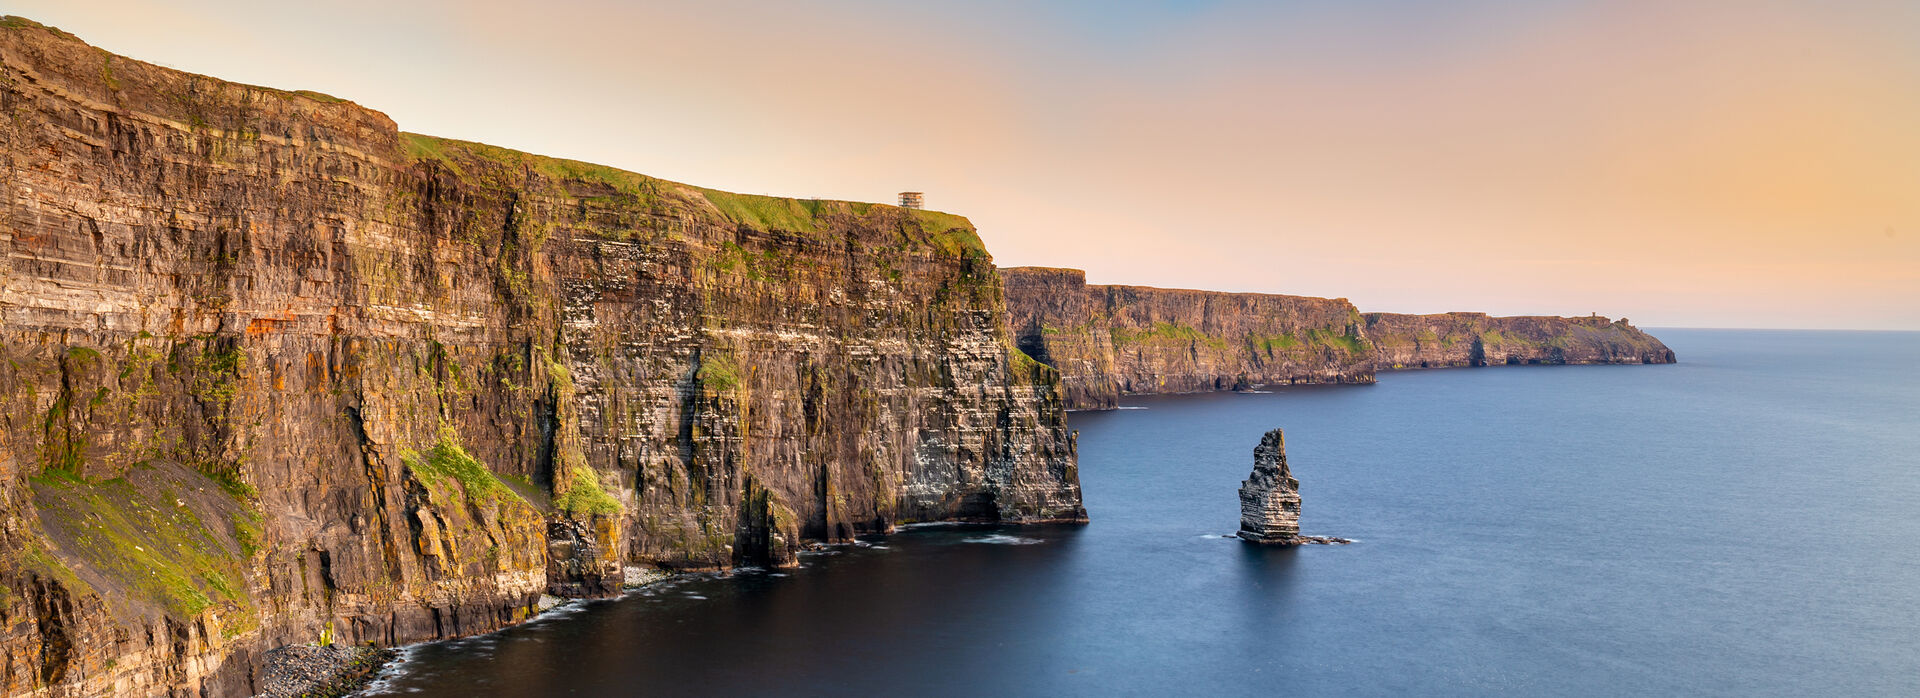 ASH Cliffs Moher GettyImages 11536672990